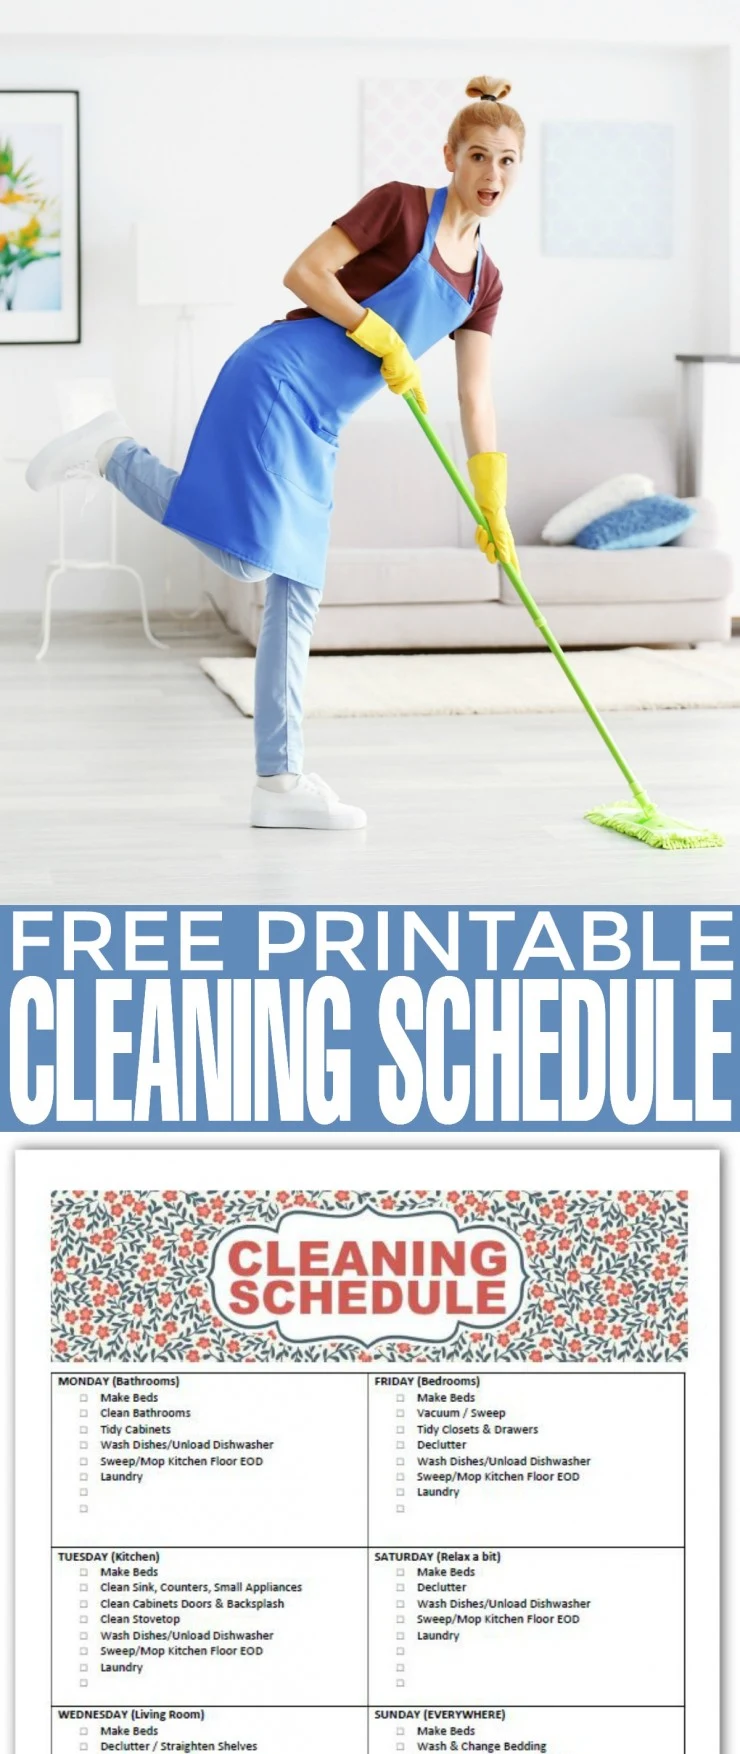 Download and print off this Free Printable Cleaning Schedule now and start to get organised for more efficient cleaning around your house. Once you get into the groove of following a set cleaning schedule the jobs will only get easier and easier as your living space gets cleaned regularly.